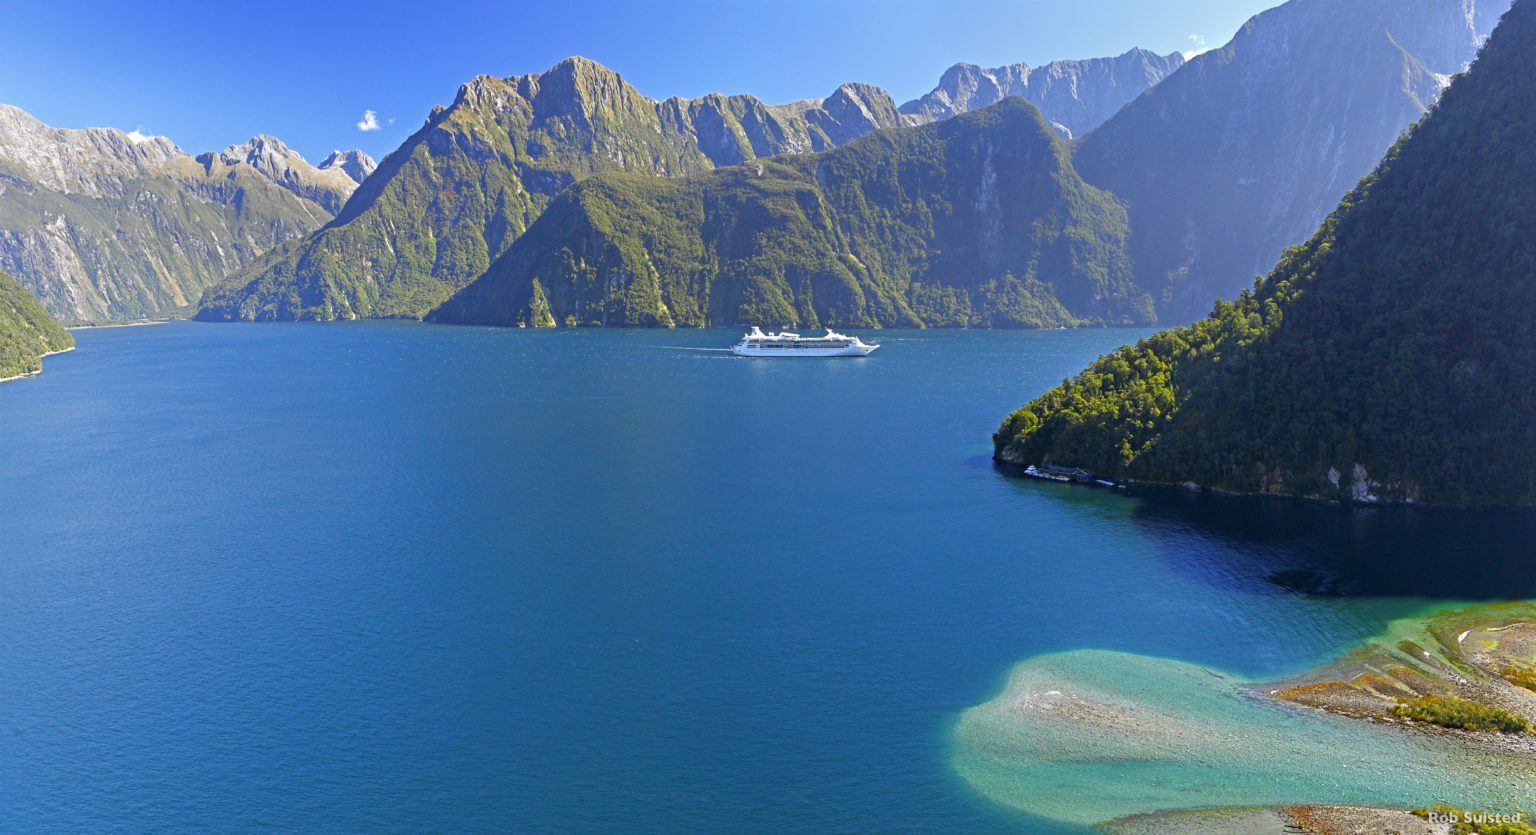 A cruise boat in the Milford Sound